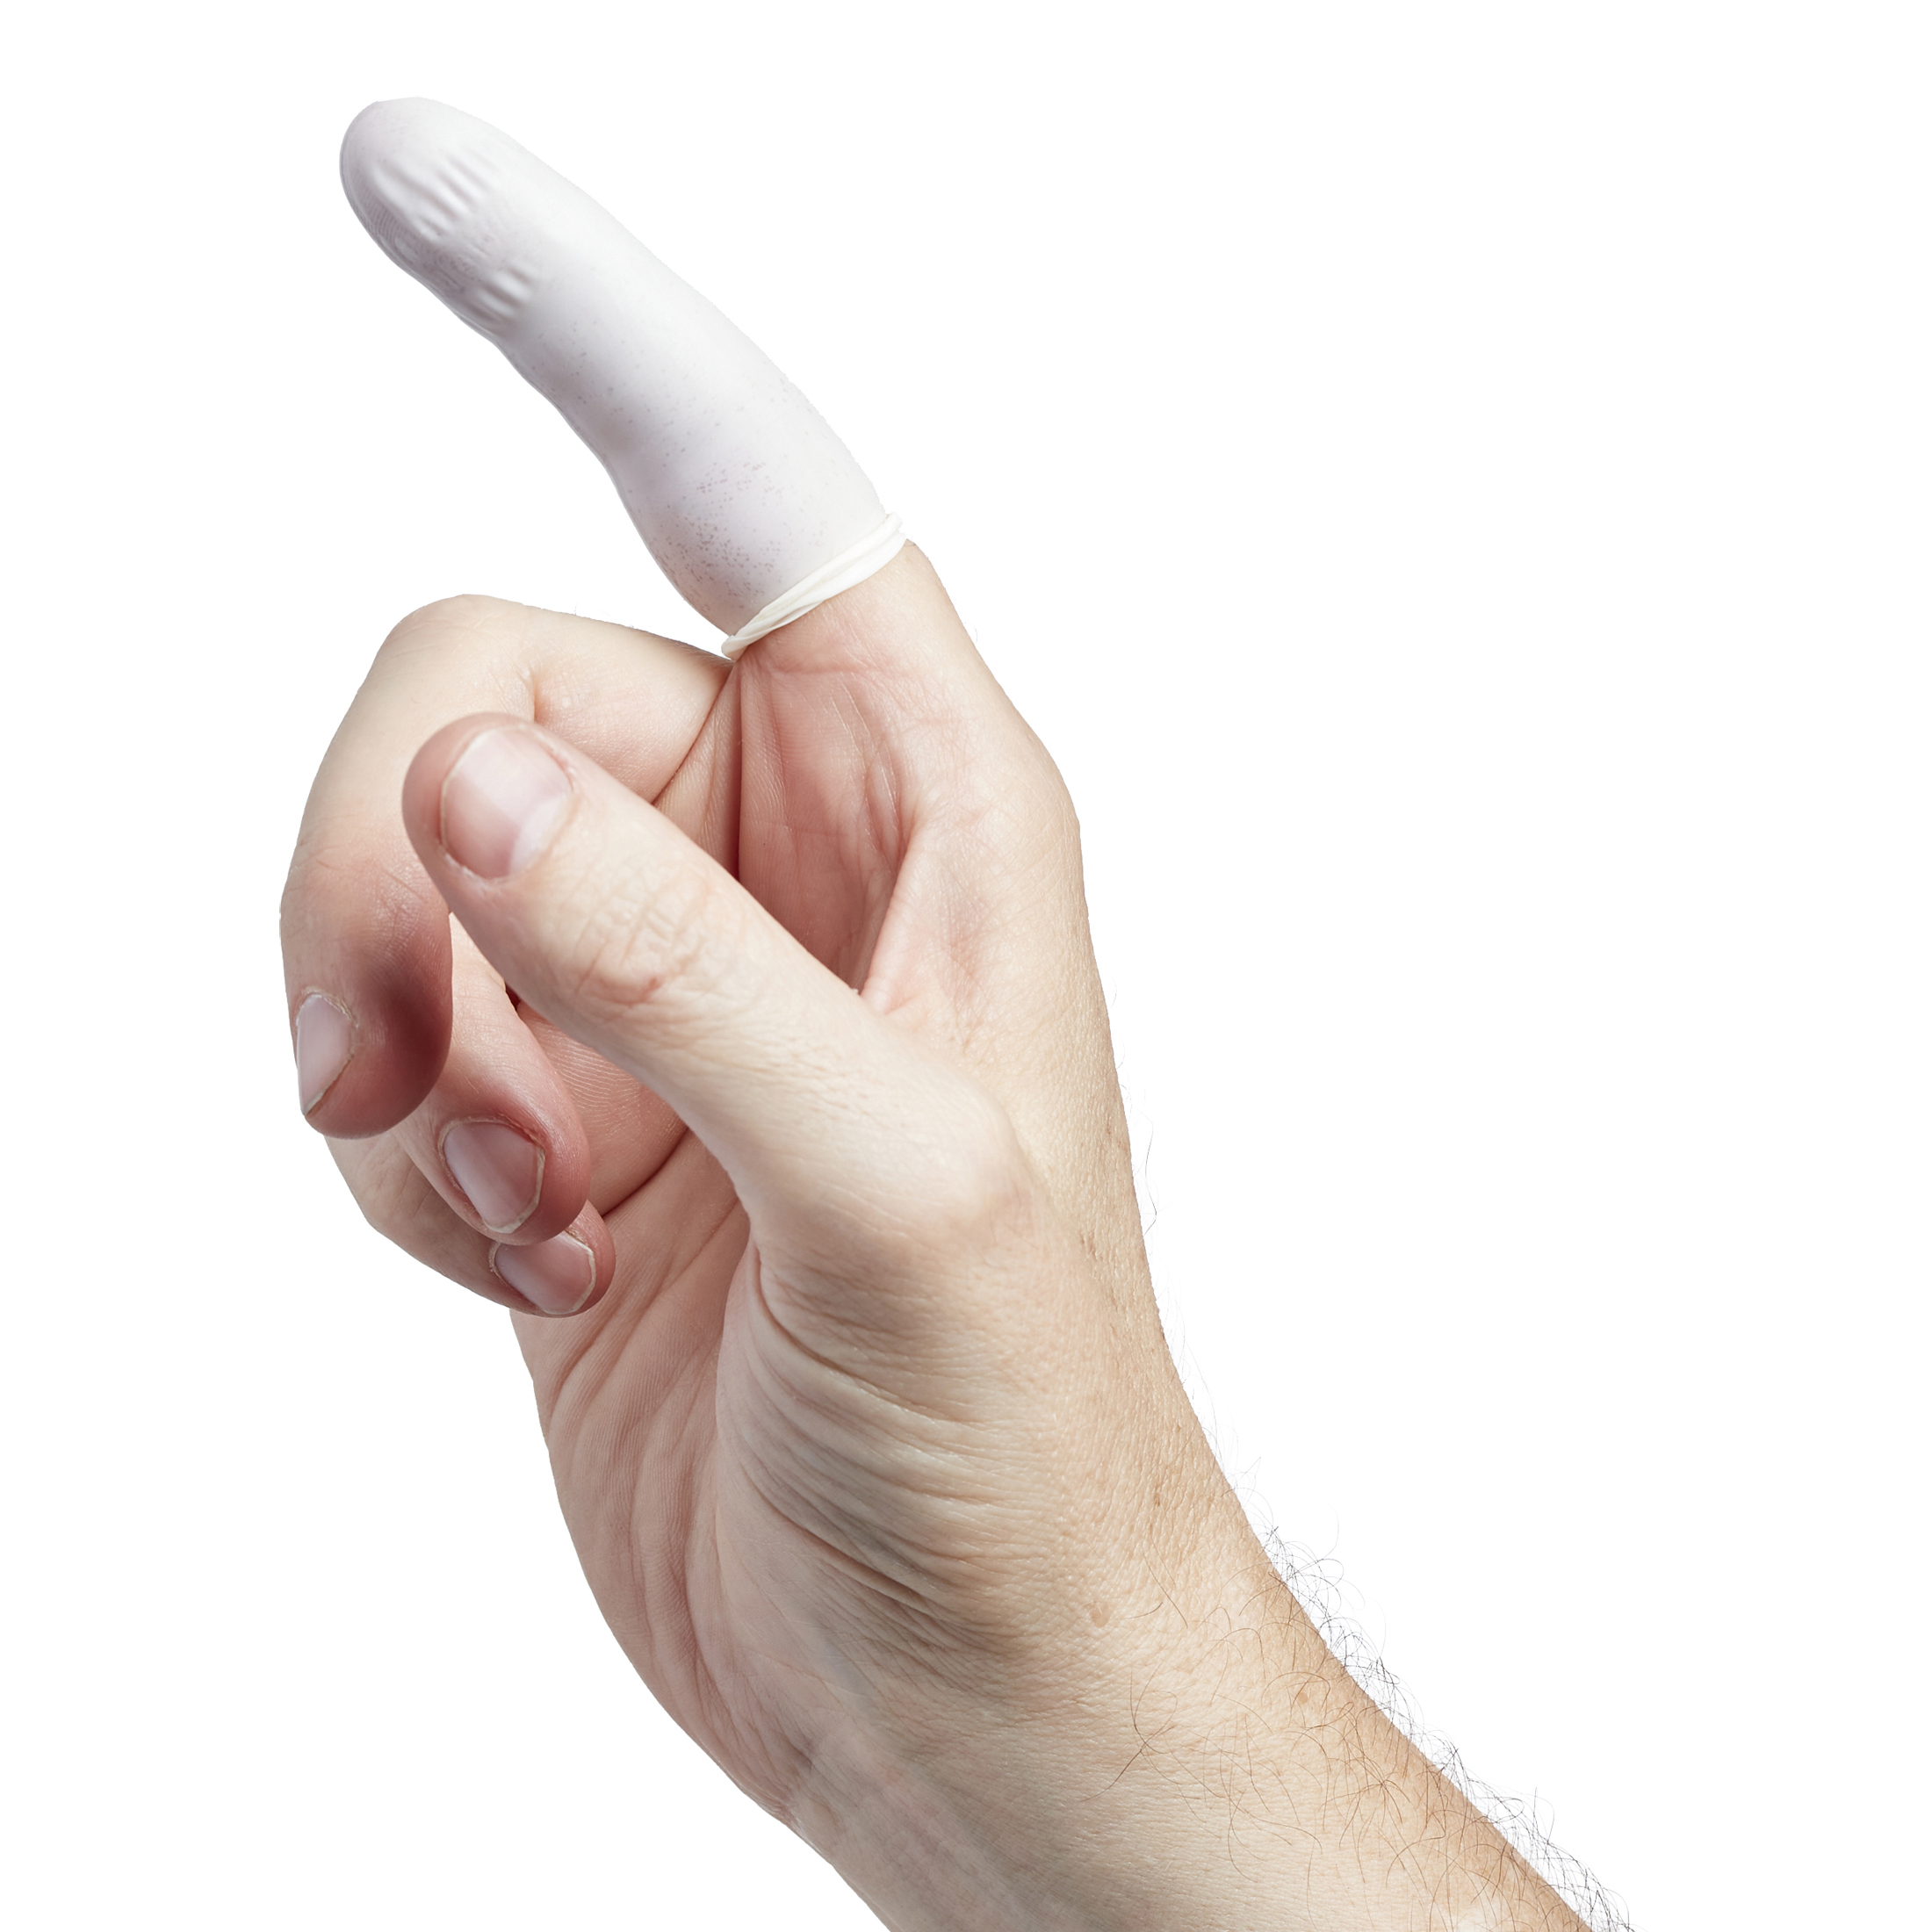 Equate Latex Finger Covers, 36 Count - image 2 of 8